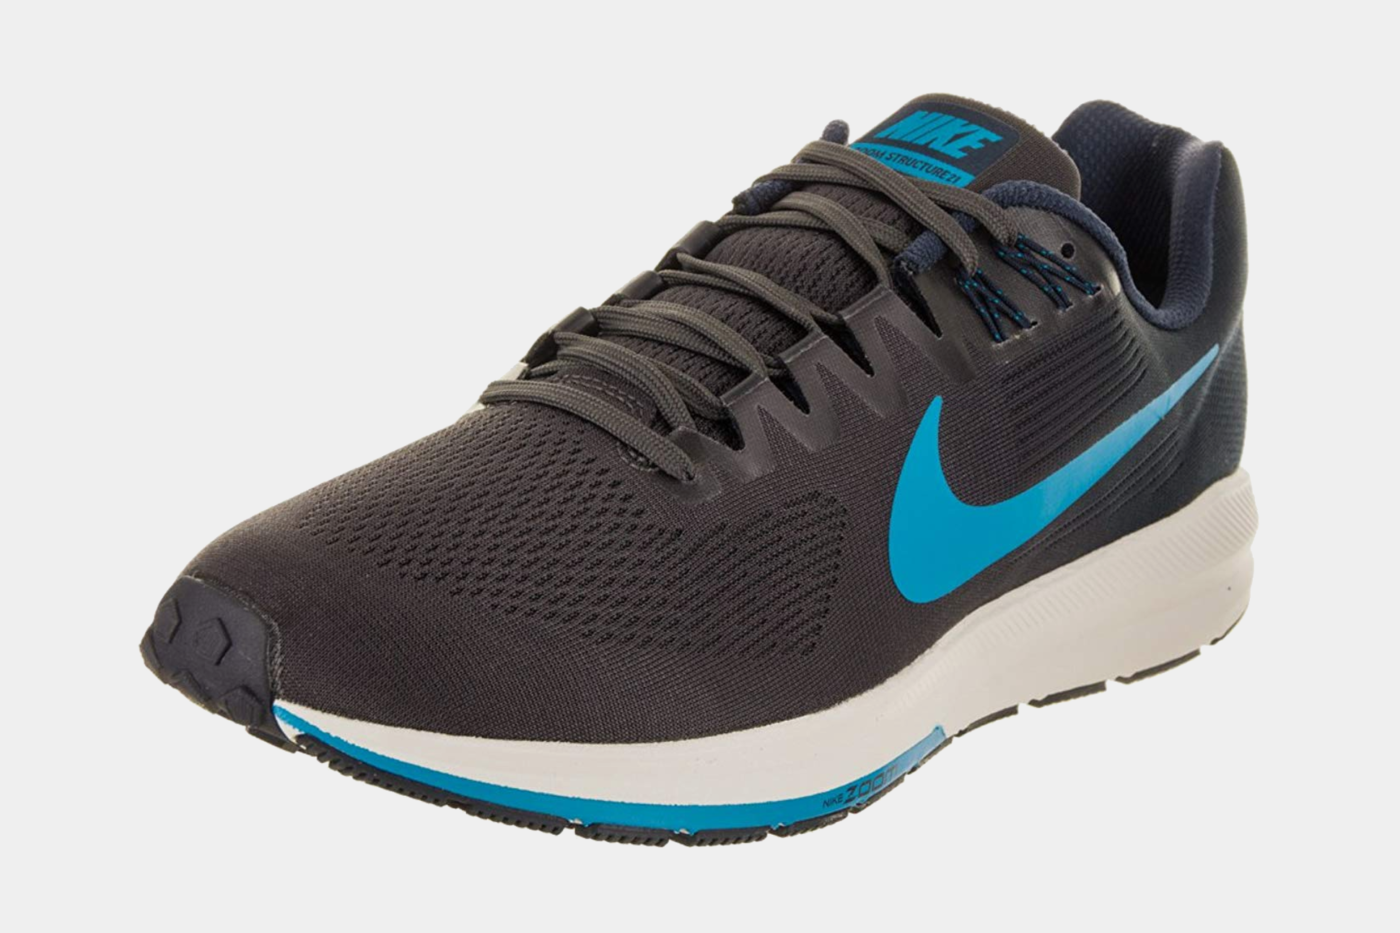 Nike Men’s Air Zoom Structure 21 Running Shoe